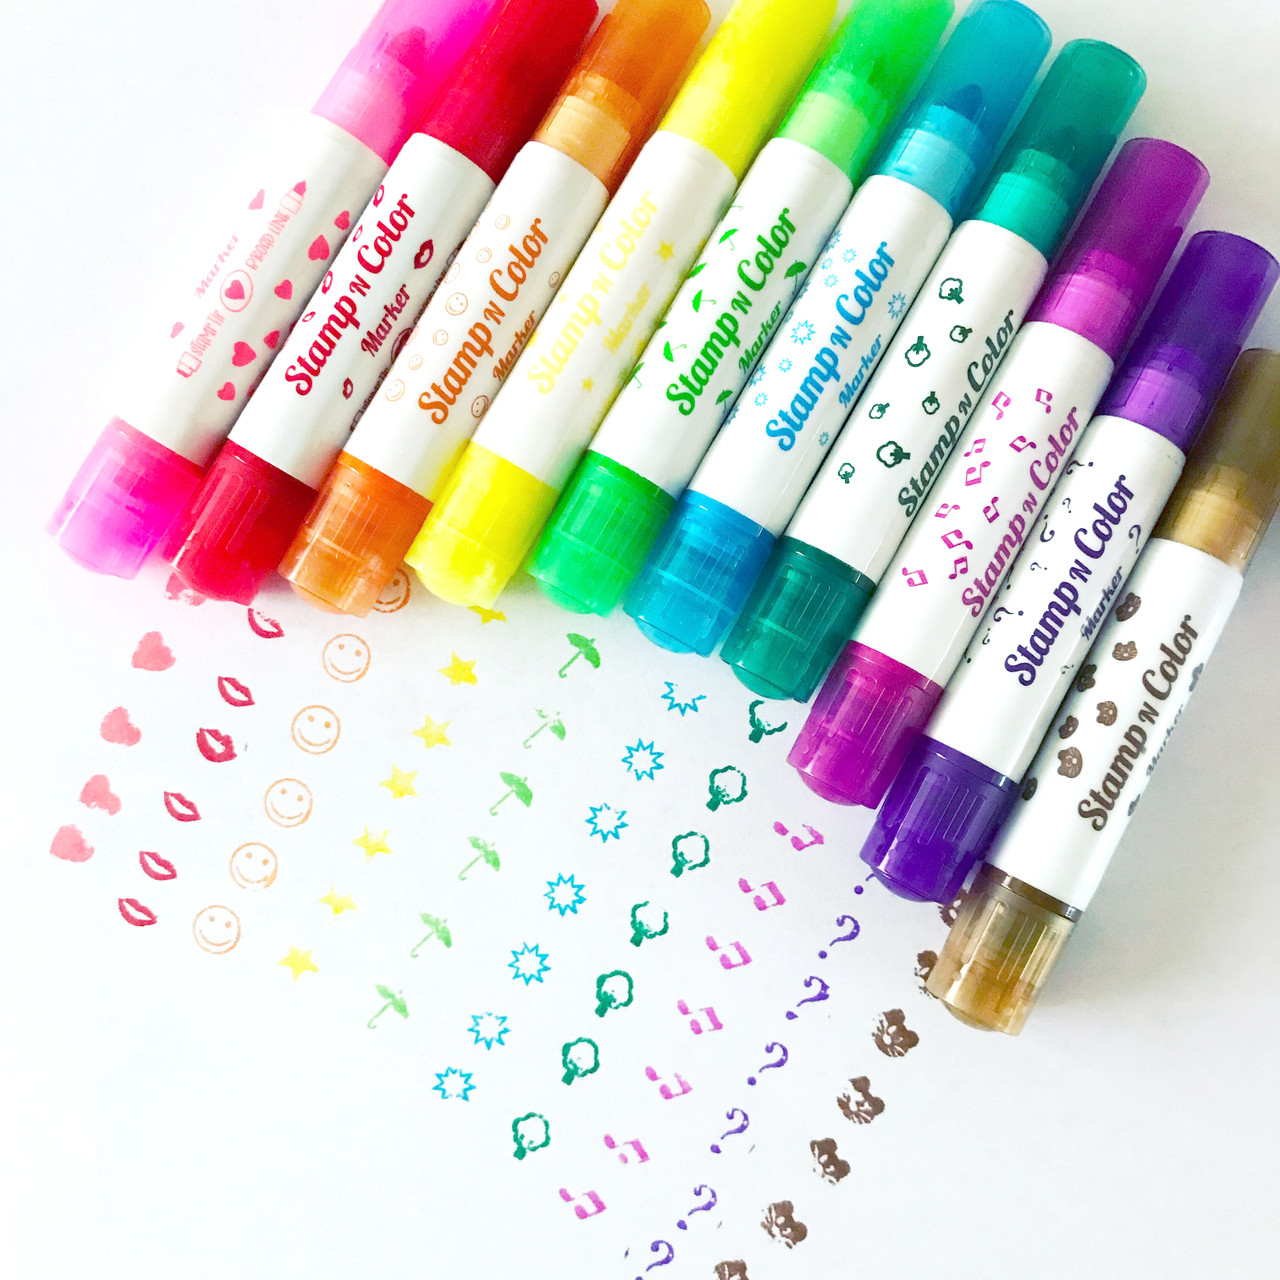 SES Creative Stamping with Markers - Bright, Bold Colored Washable Markers  with Stamp - Easy Grip Non-Toxic Paint Stamp Pen for Kids - 6 Colors